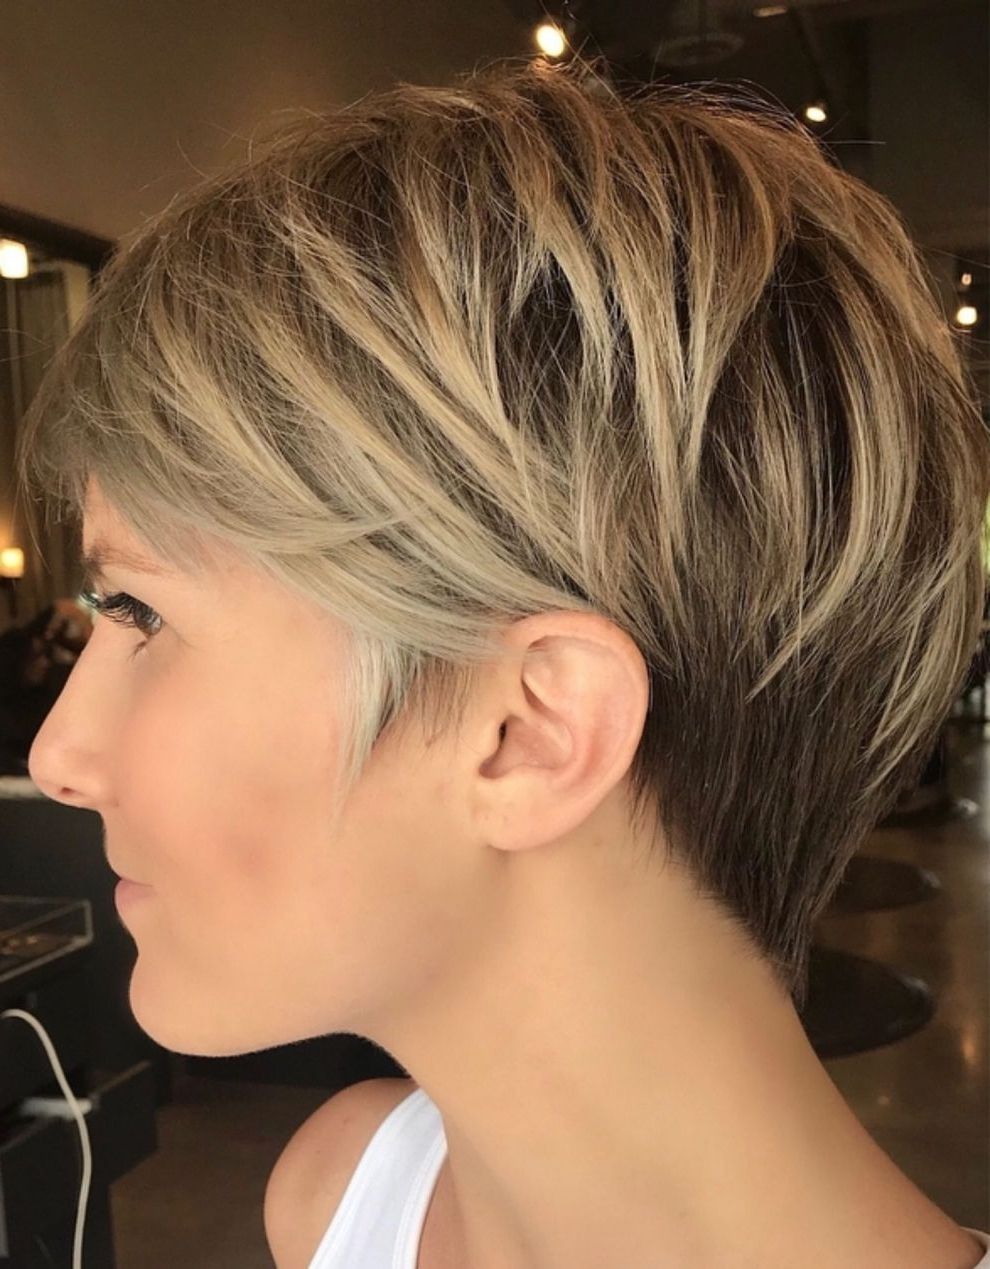 100 Mind Blowing Short Hairstyles For Fine Hair | Pinterest | Fine With Newest Stacked Pixie Haircuts With V Cut Nape (View 15 of 15)